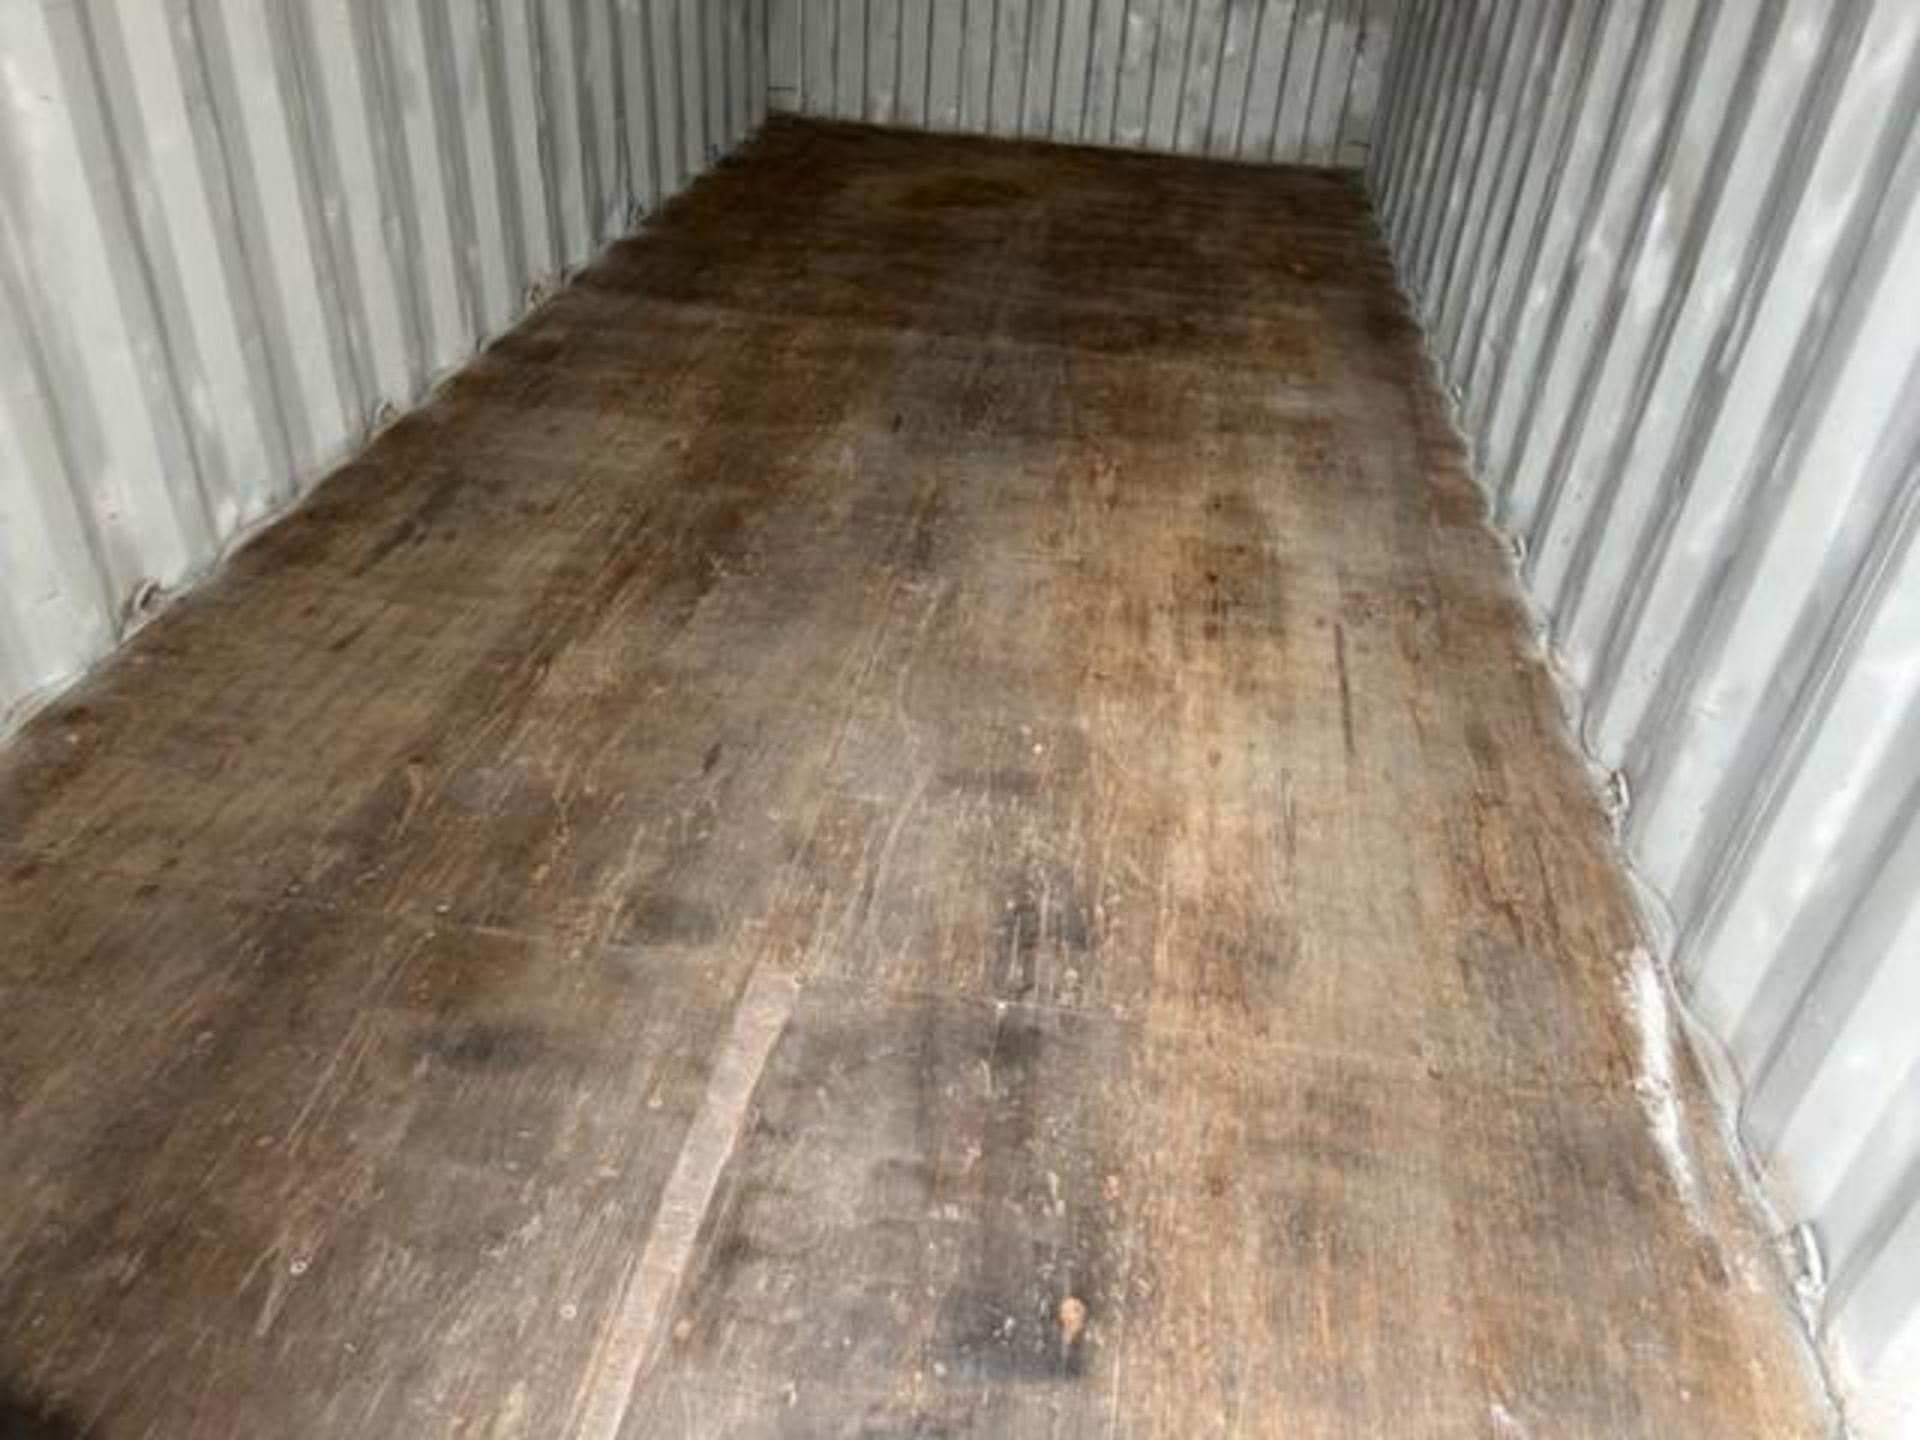 20' Sea Container SN#: CAIU2176670 (Located in S.E. Calgary) - Image 6 of 11